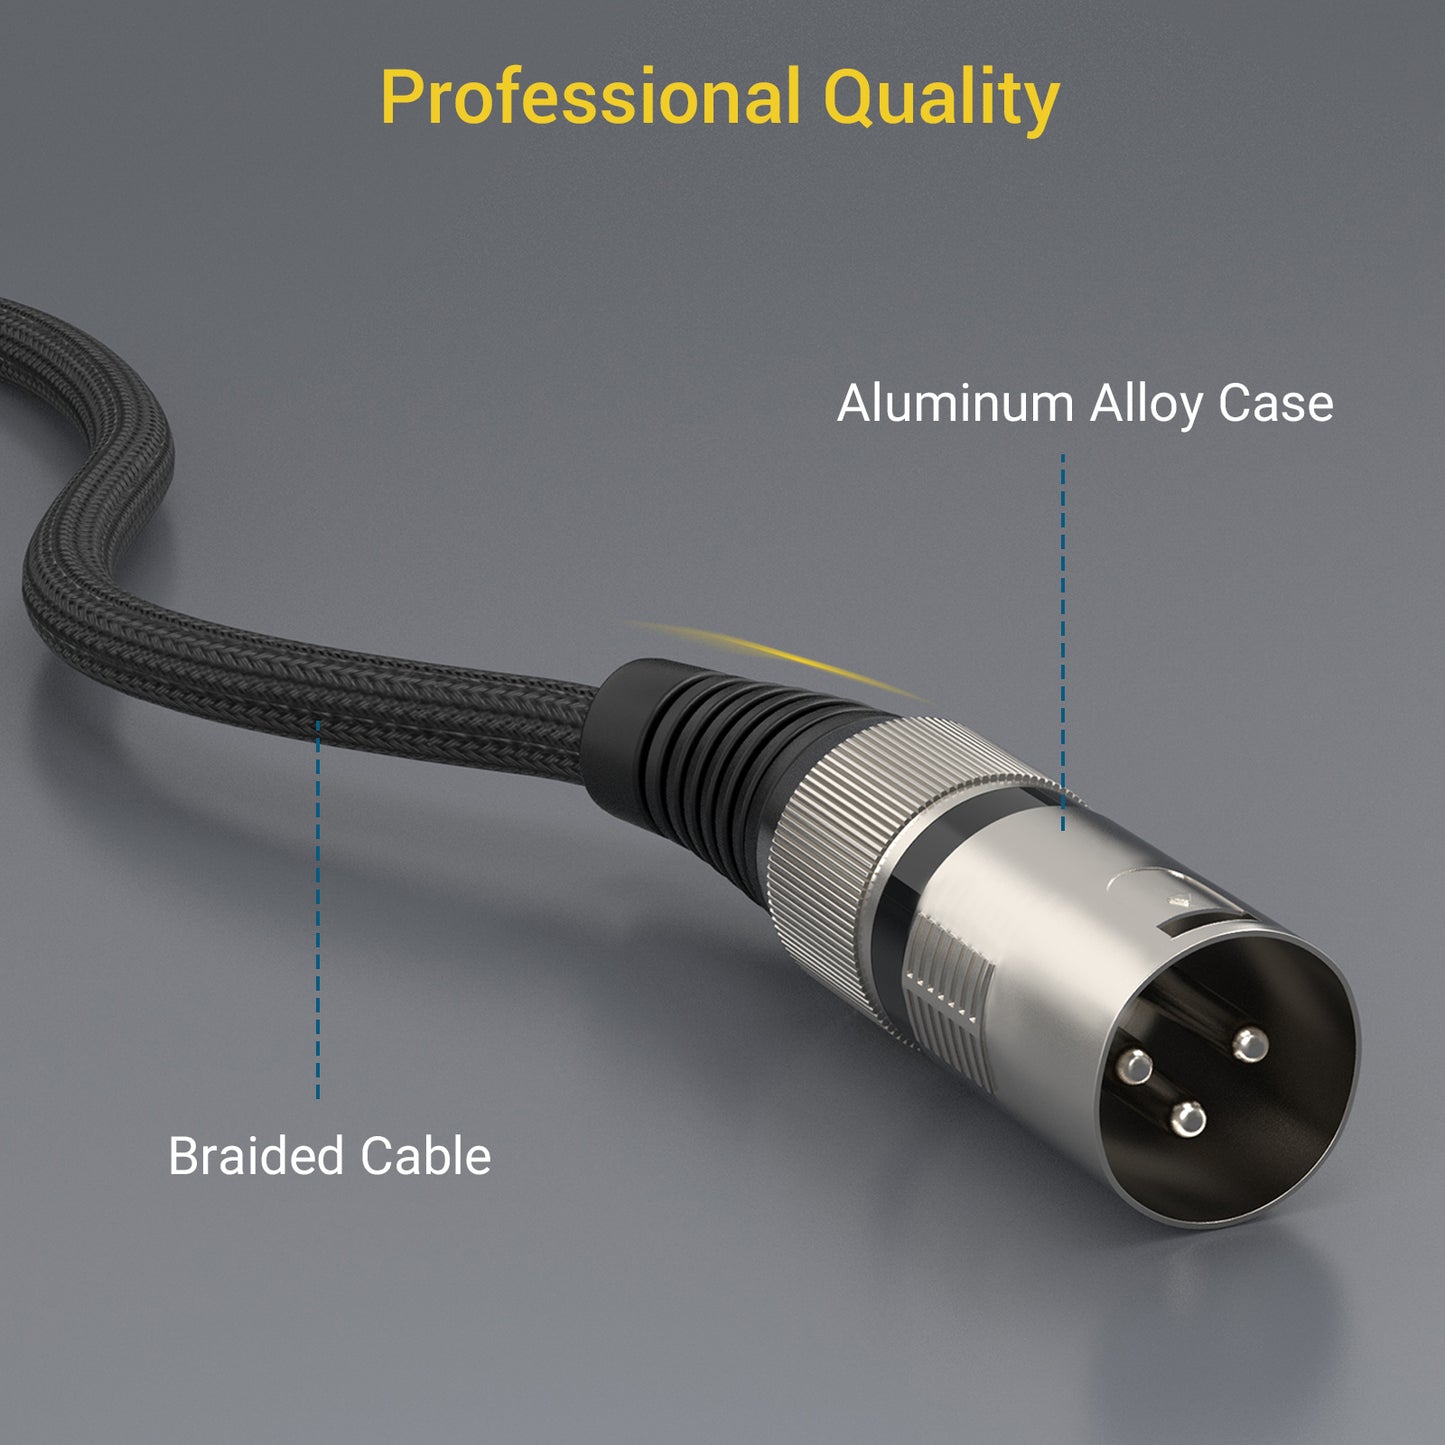 XLR Female to Male Cable